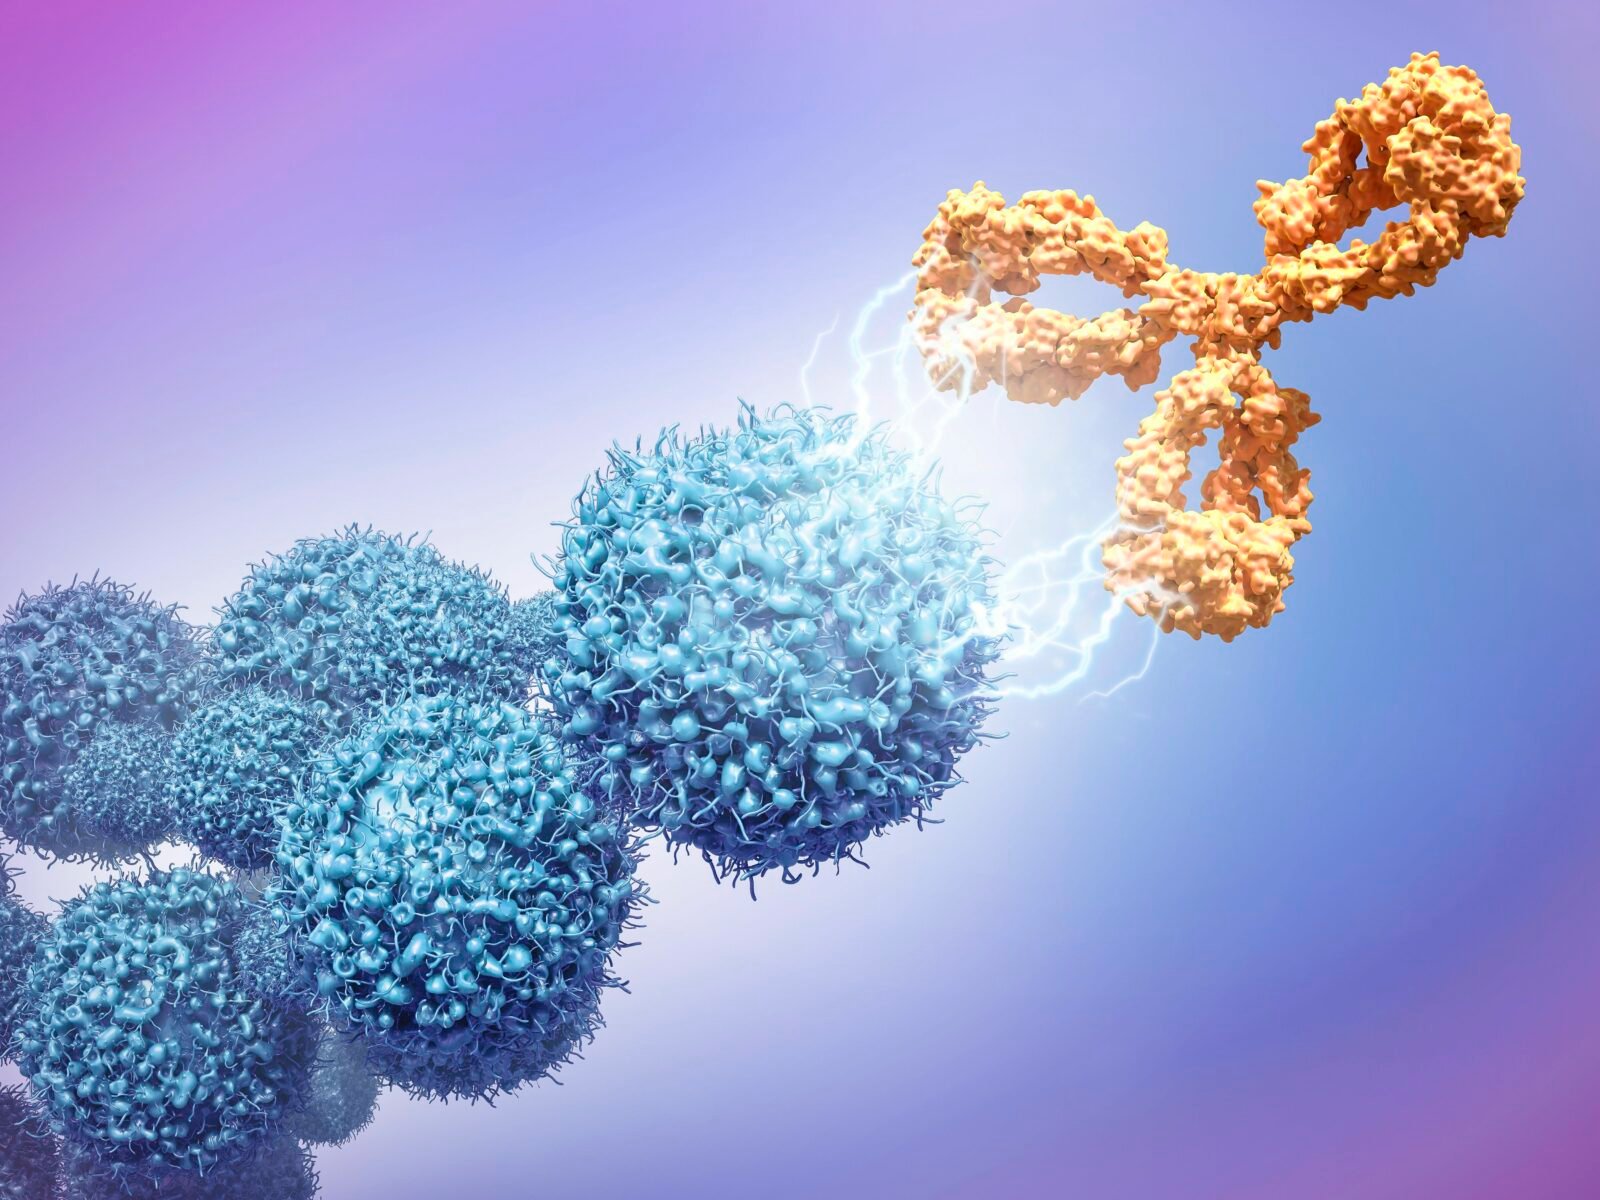 Challenges In The Development of Therapeutic Antibody